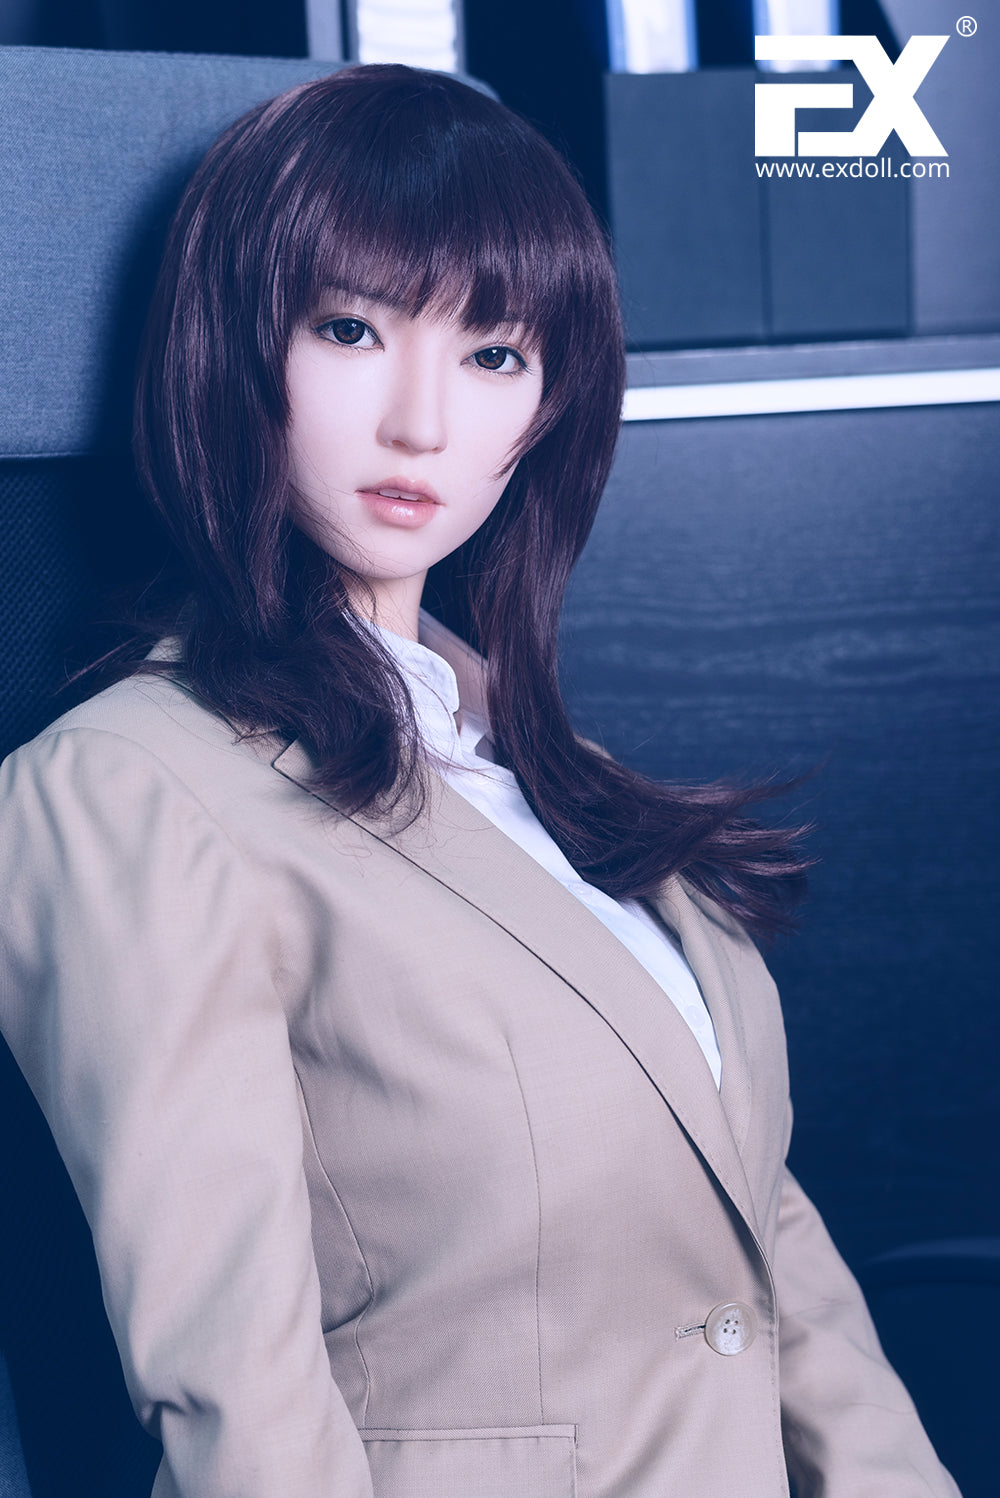 EX Doll Ukiyoe Series 170 cm Silicone - Miki | Buy Sex Dolls at DOLLS ACTUALLY